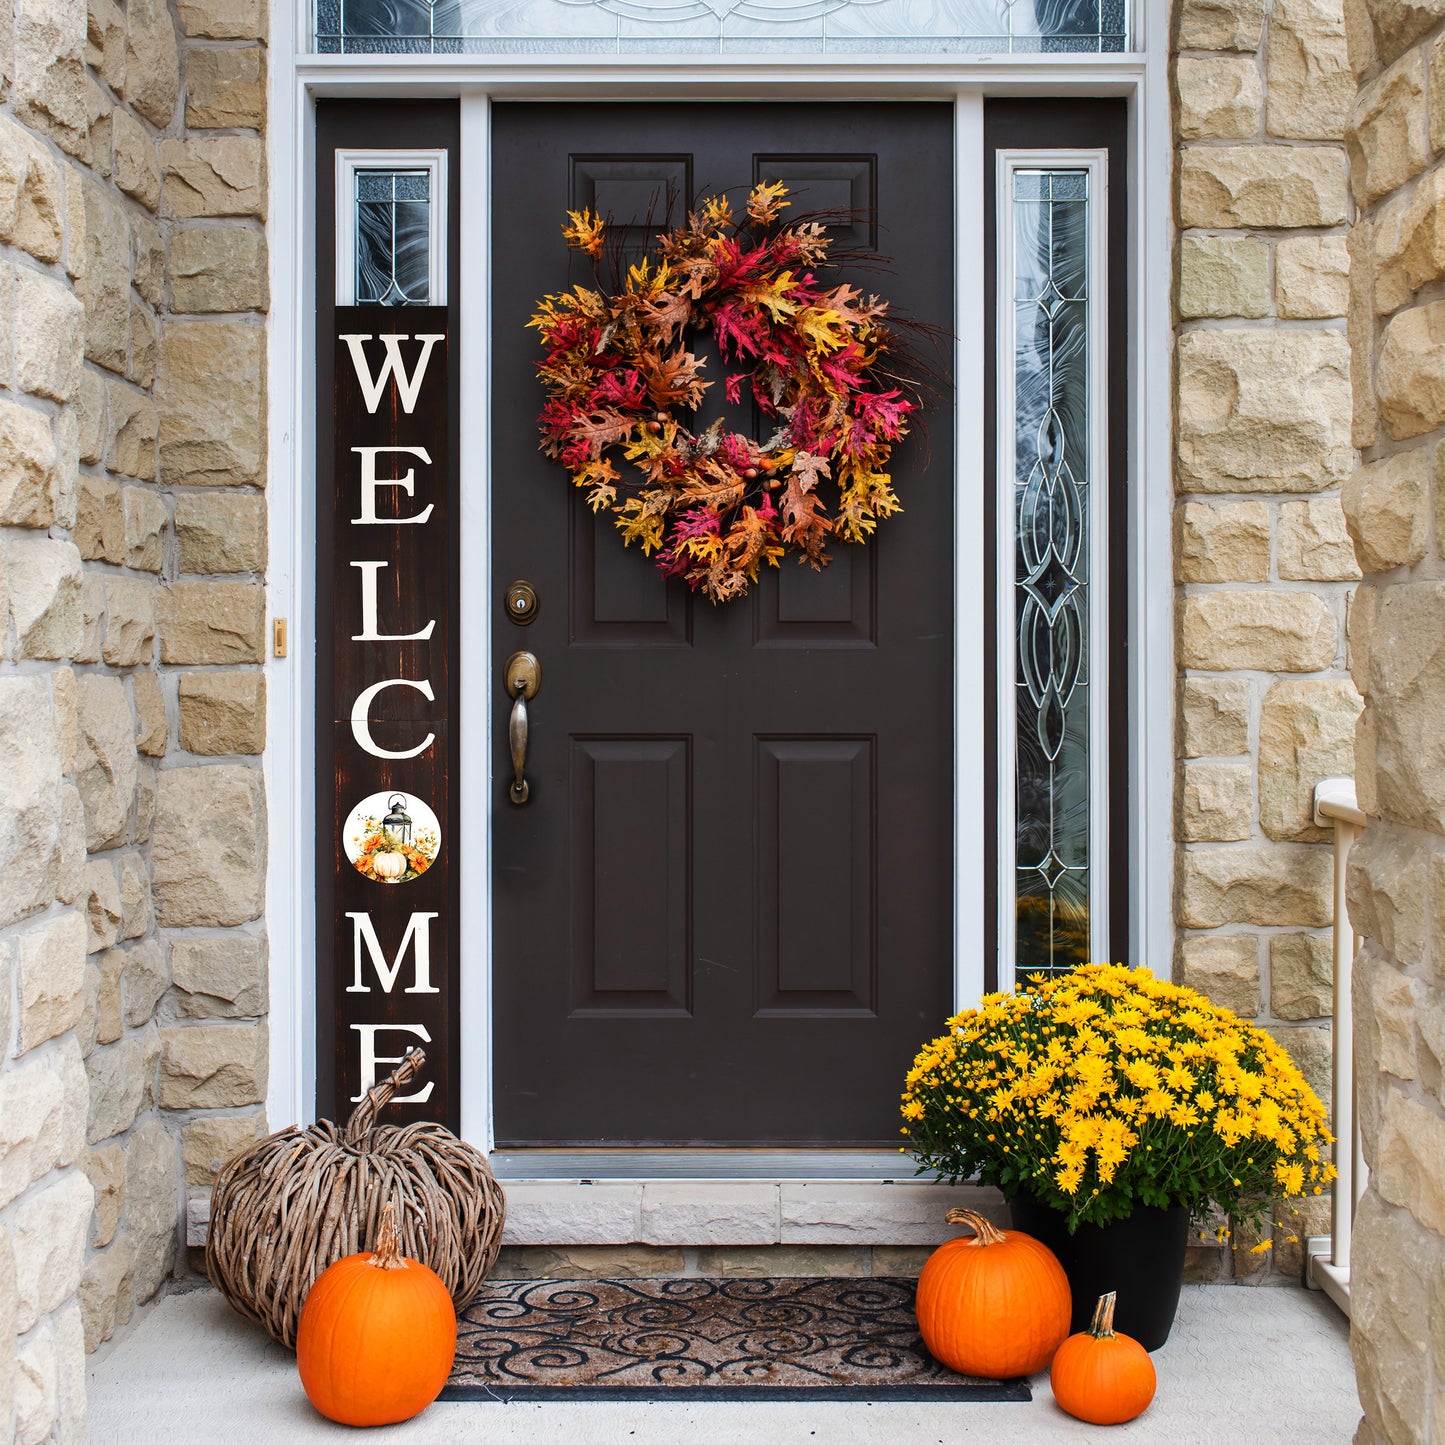 72in "Welcome" Fall Porch Sign with Lantern Design - Brown Porch Board Decor for Front Door during Autumn and Thanksgiving Celebrations